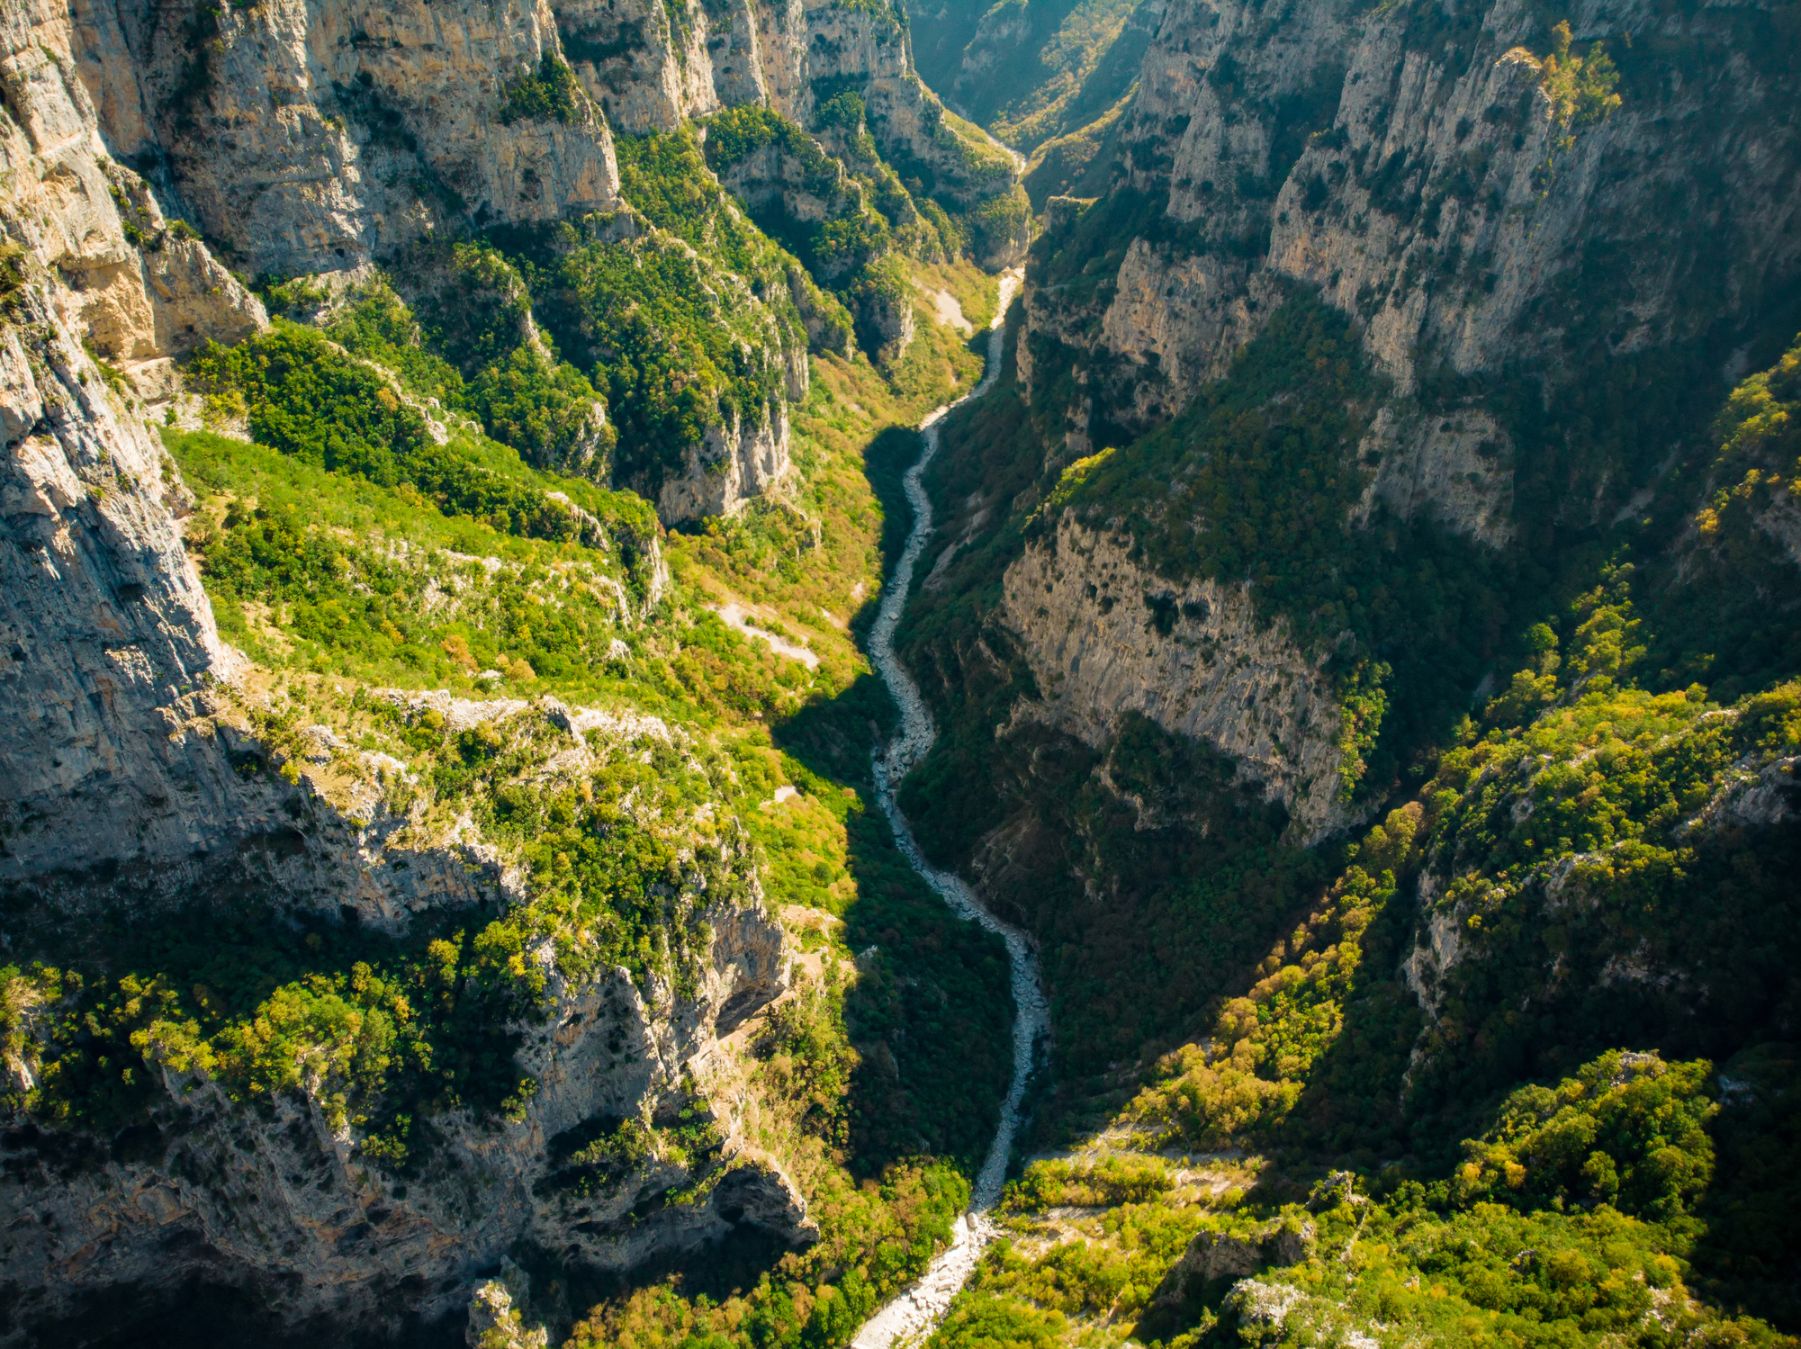 Vikos Gorge in the Pindus Mountains of northern Greece. It’s one of the deepest gorges in the world